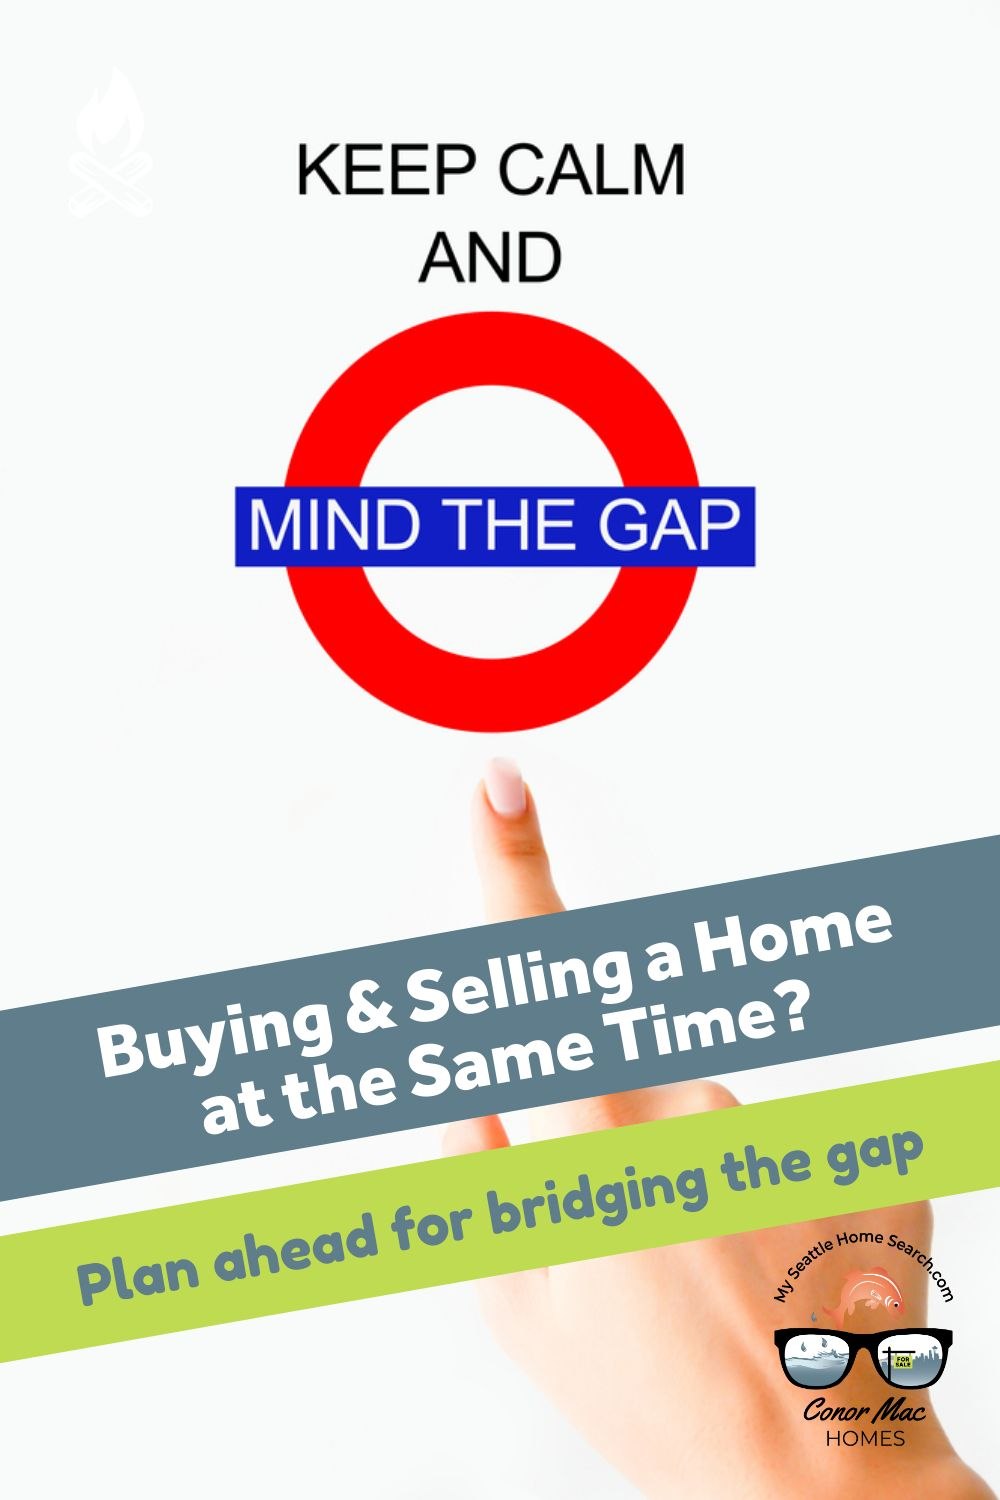 The gap when buying and selling a home at the same time